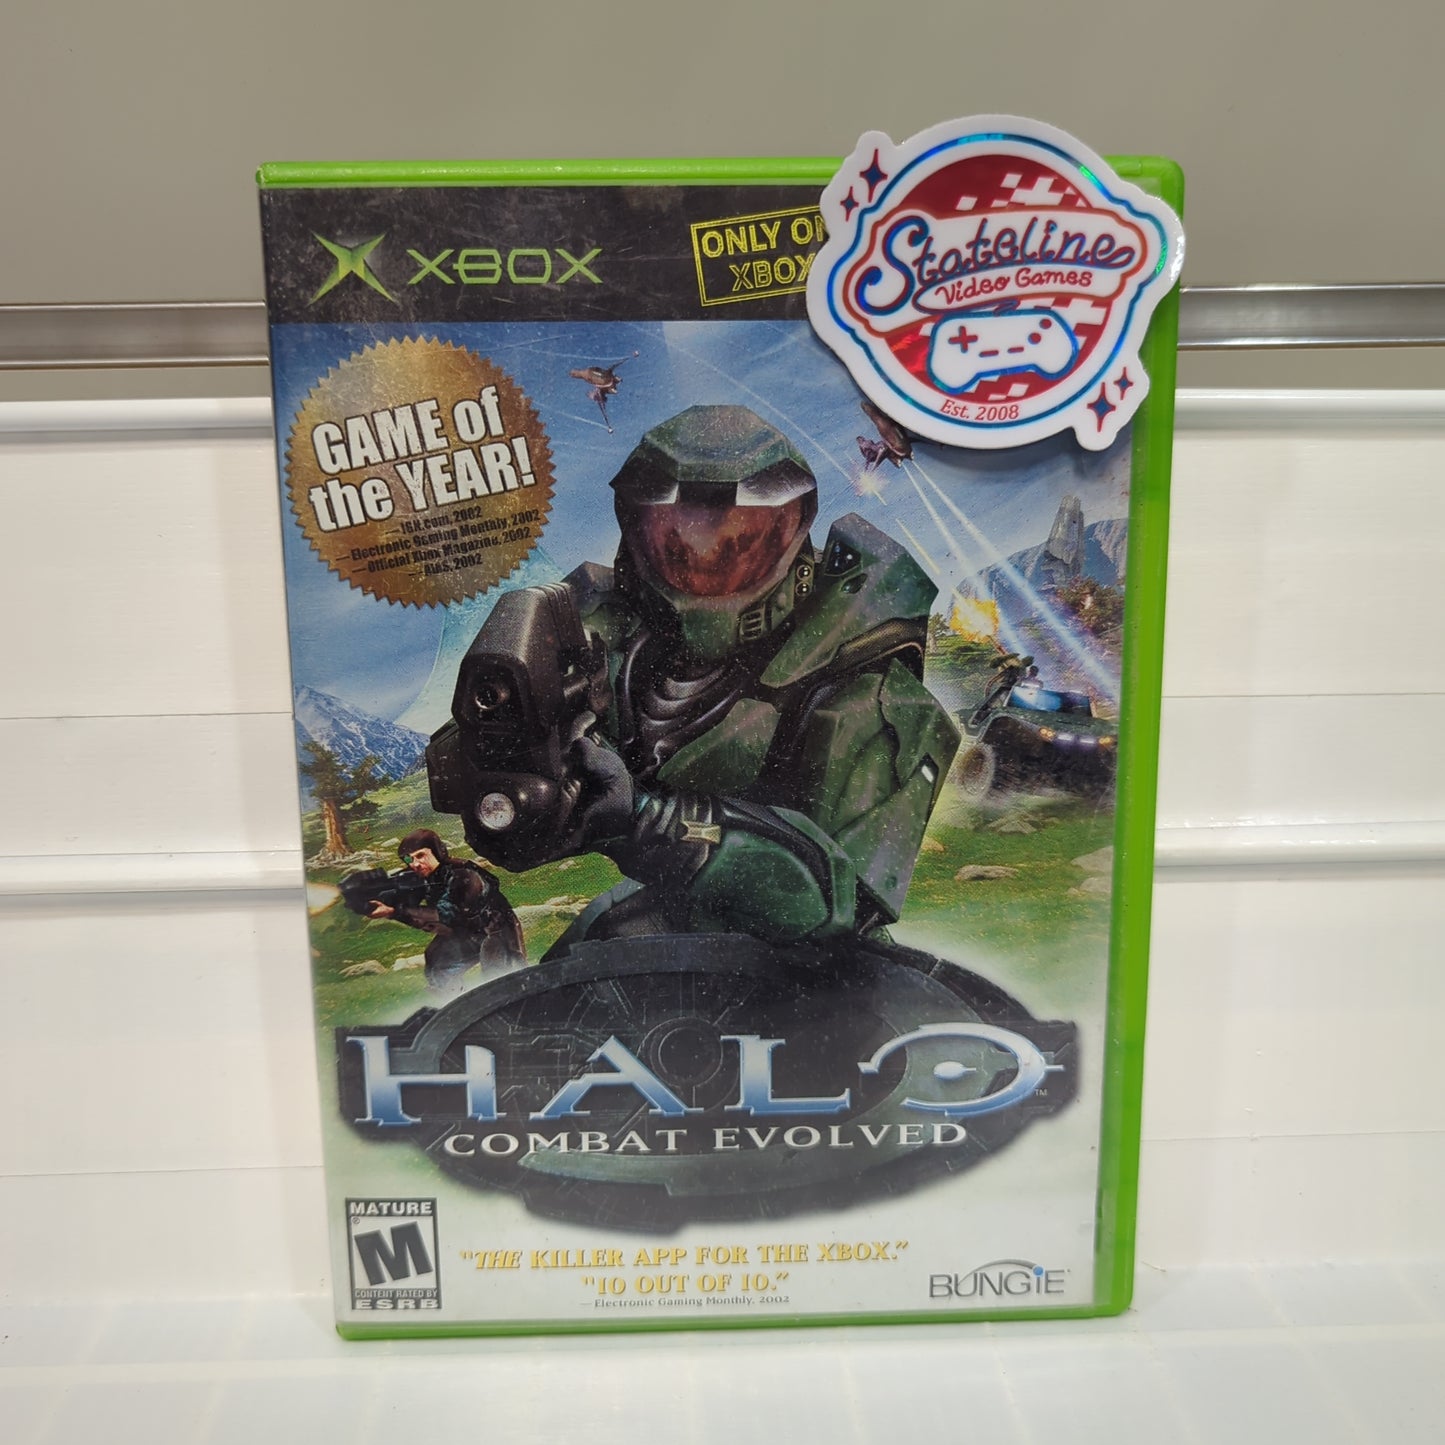 Halo: Combat Evolved [Game of the Year] - Xbox